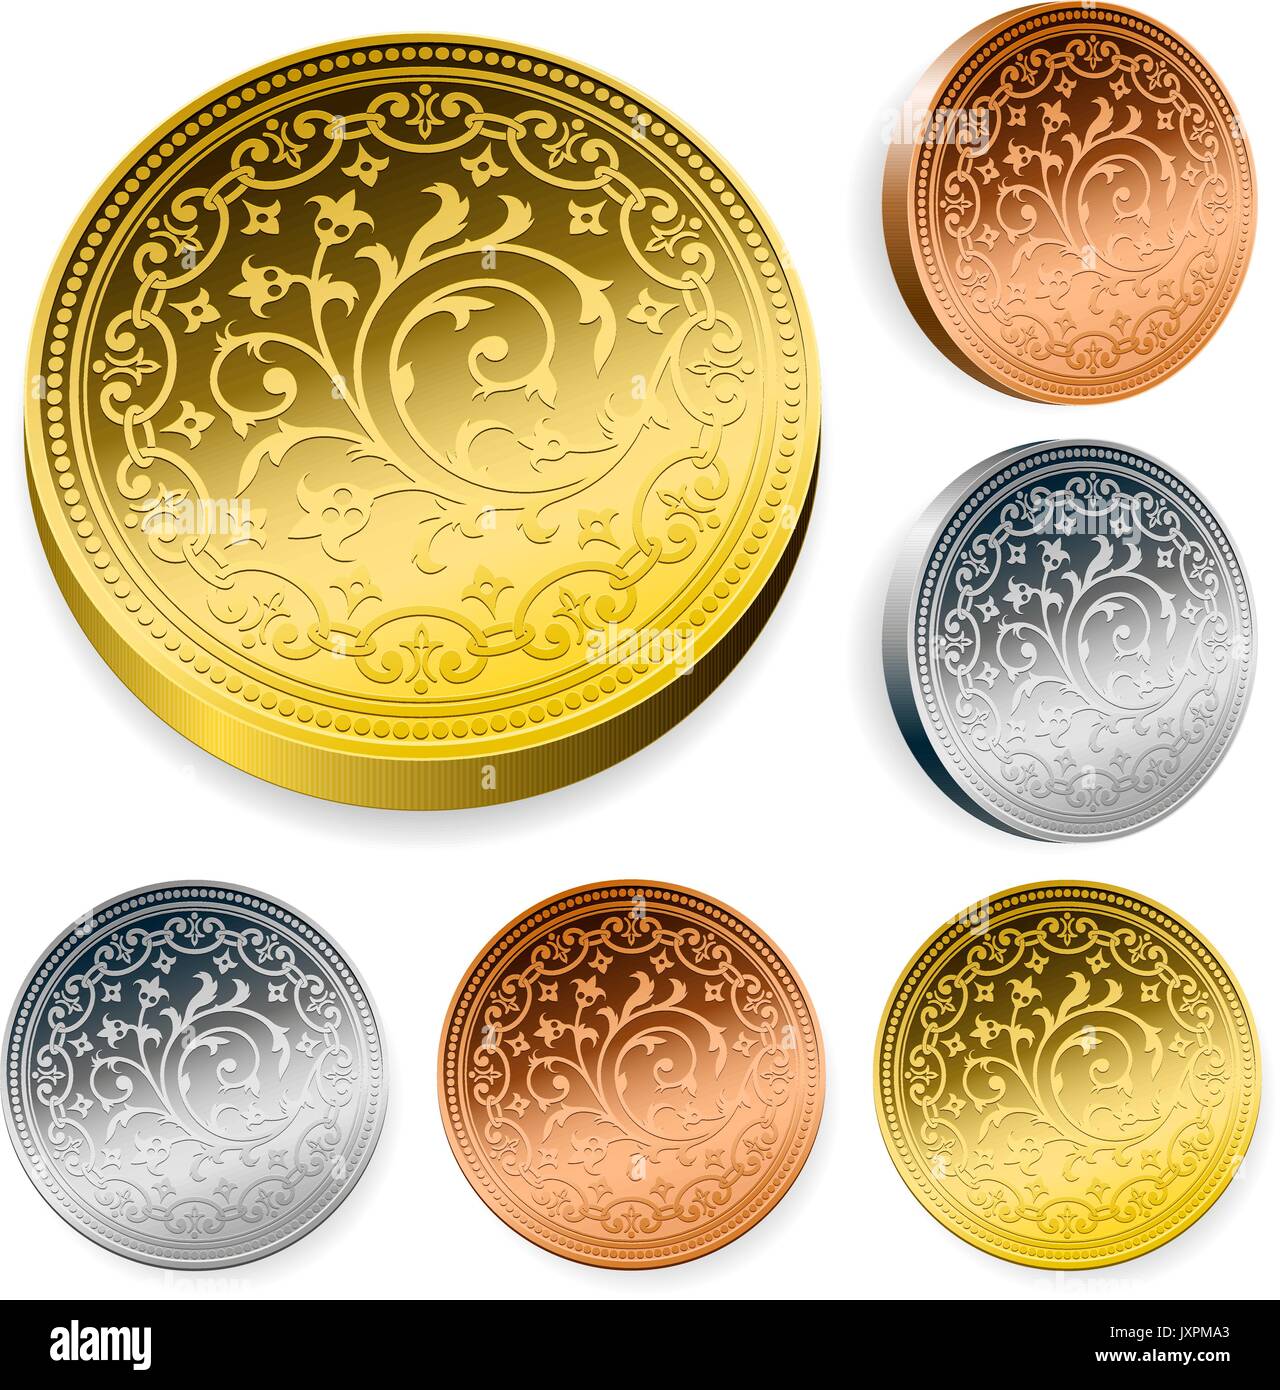 Set of ornate engraved metal coins in silver, gold and bronze with an intricate scroll and floral design and metallic shine two sets in different orie Stock Vector